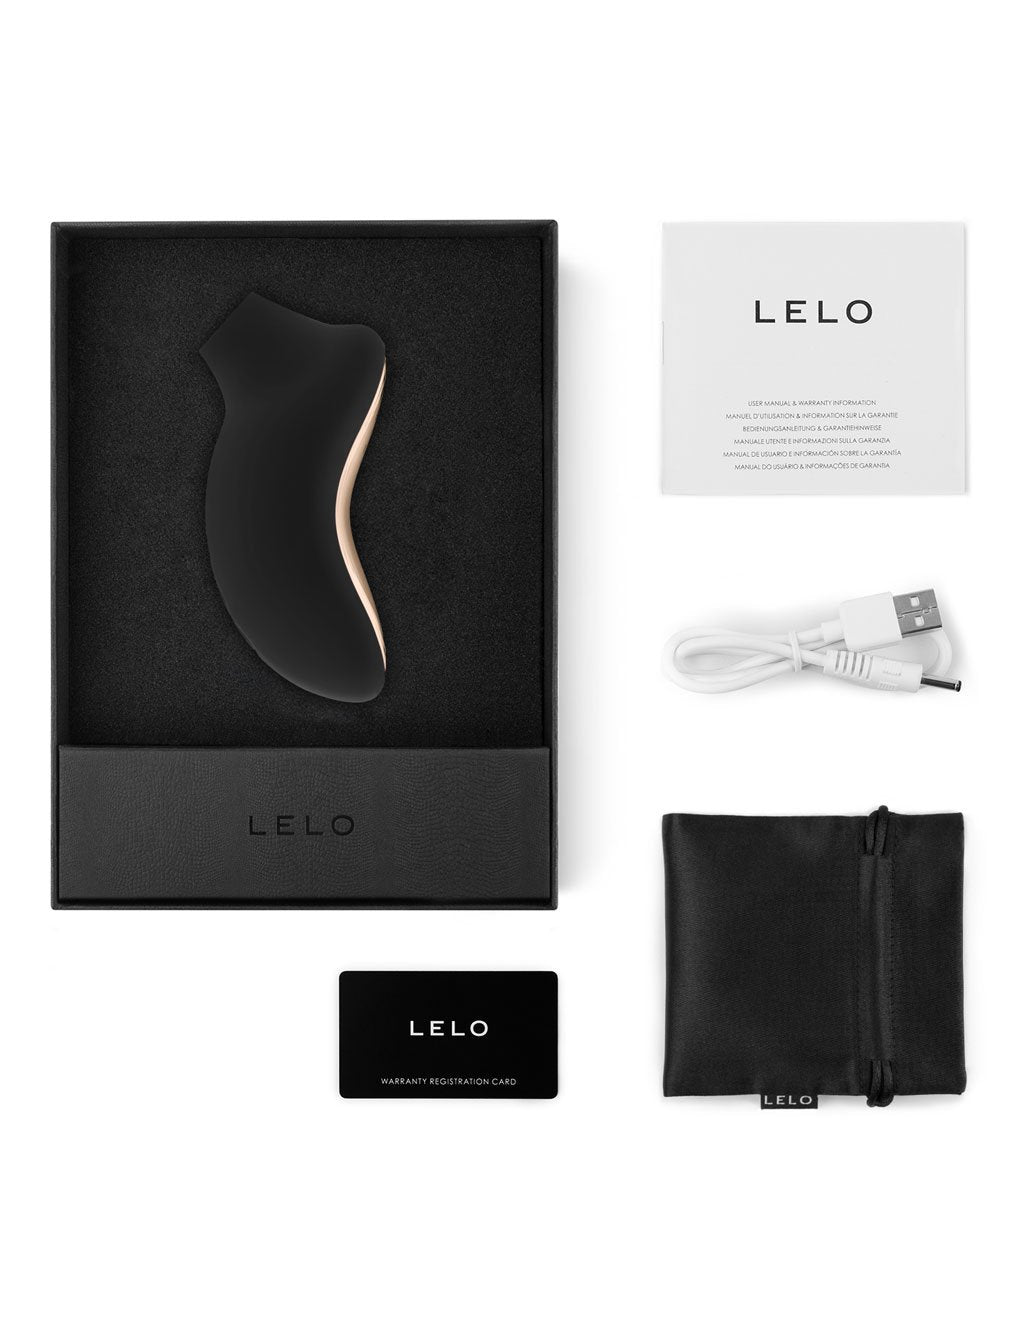 Lelo Sona Cruise 2 Sonic Clitoral Massager- Black- Contents